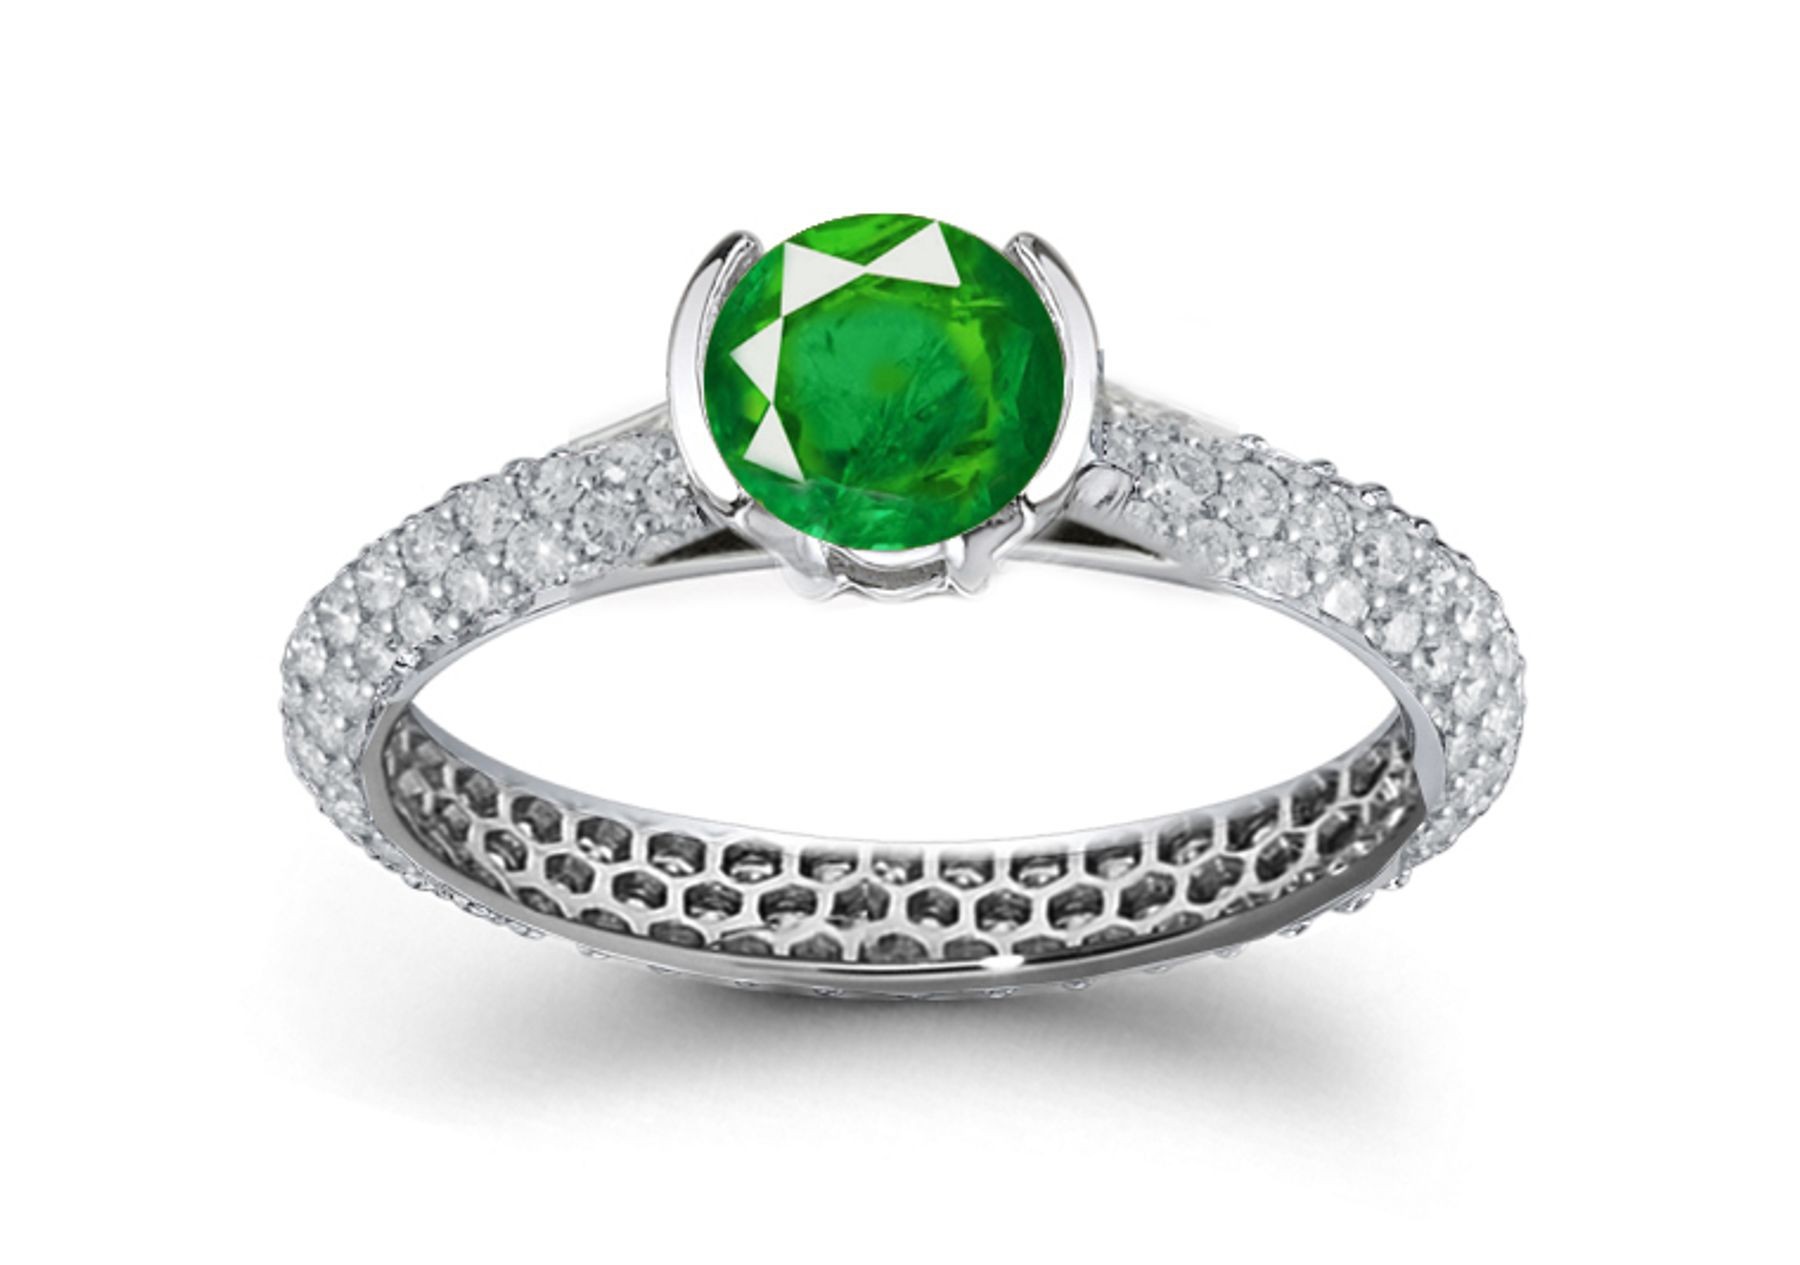 Antique and Old Styles: French Pave' Emerald & Diamond Ring in 14k White Gold & Platinm 2.293 ct